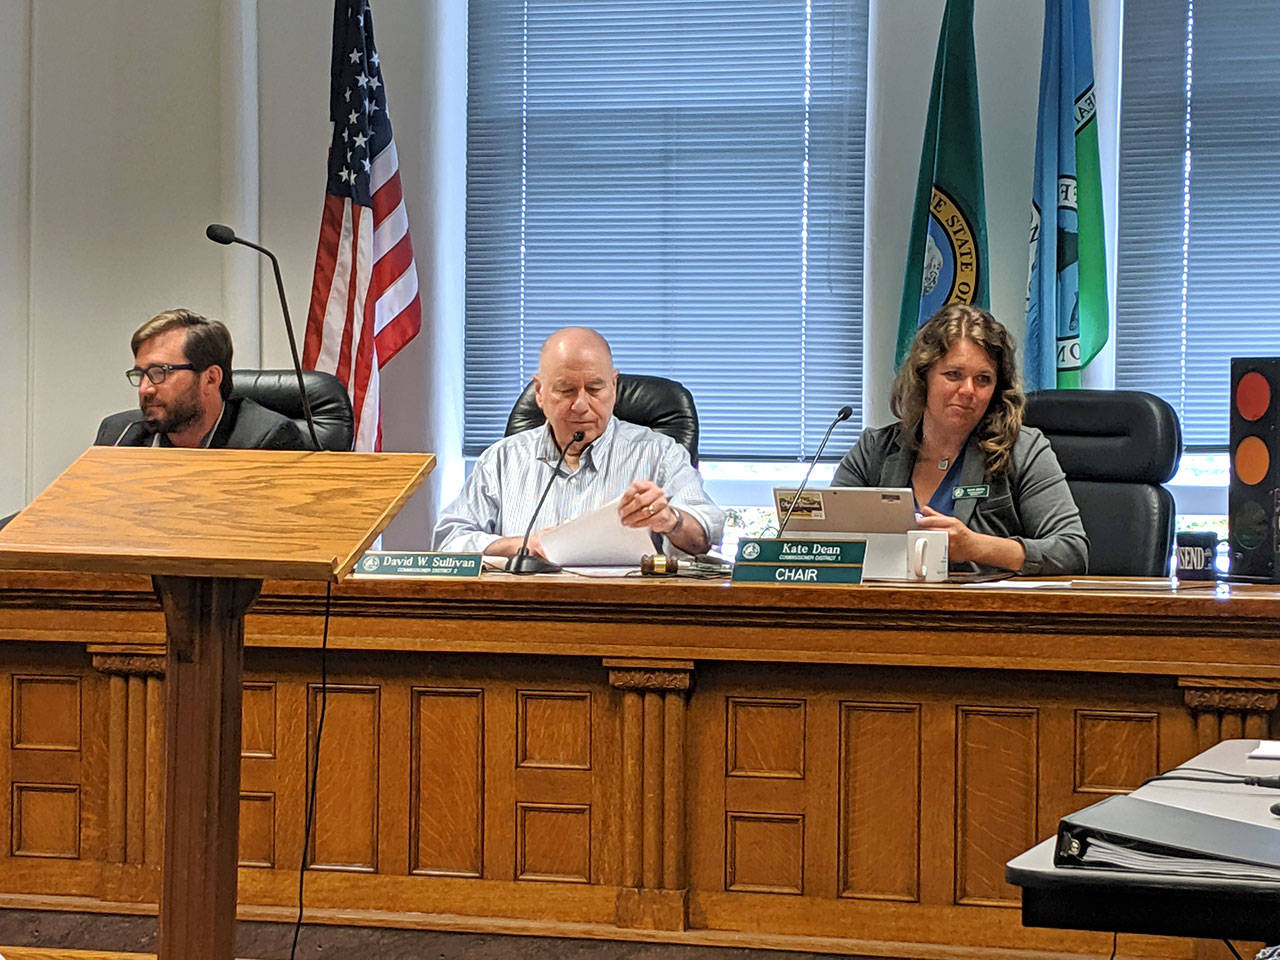 Jefferson County Commissioners Greg Brotherton, David Sullivan and Kate Dean at their Monday meeting, where they approved the spending of up to $281,060 for a software consultant. (Zach Jablonski/Peninsula Daily News)